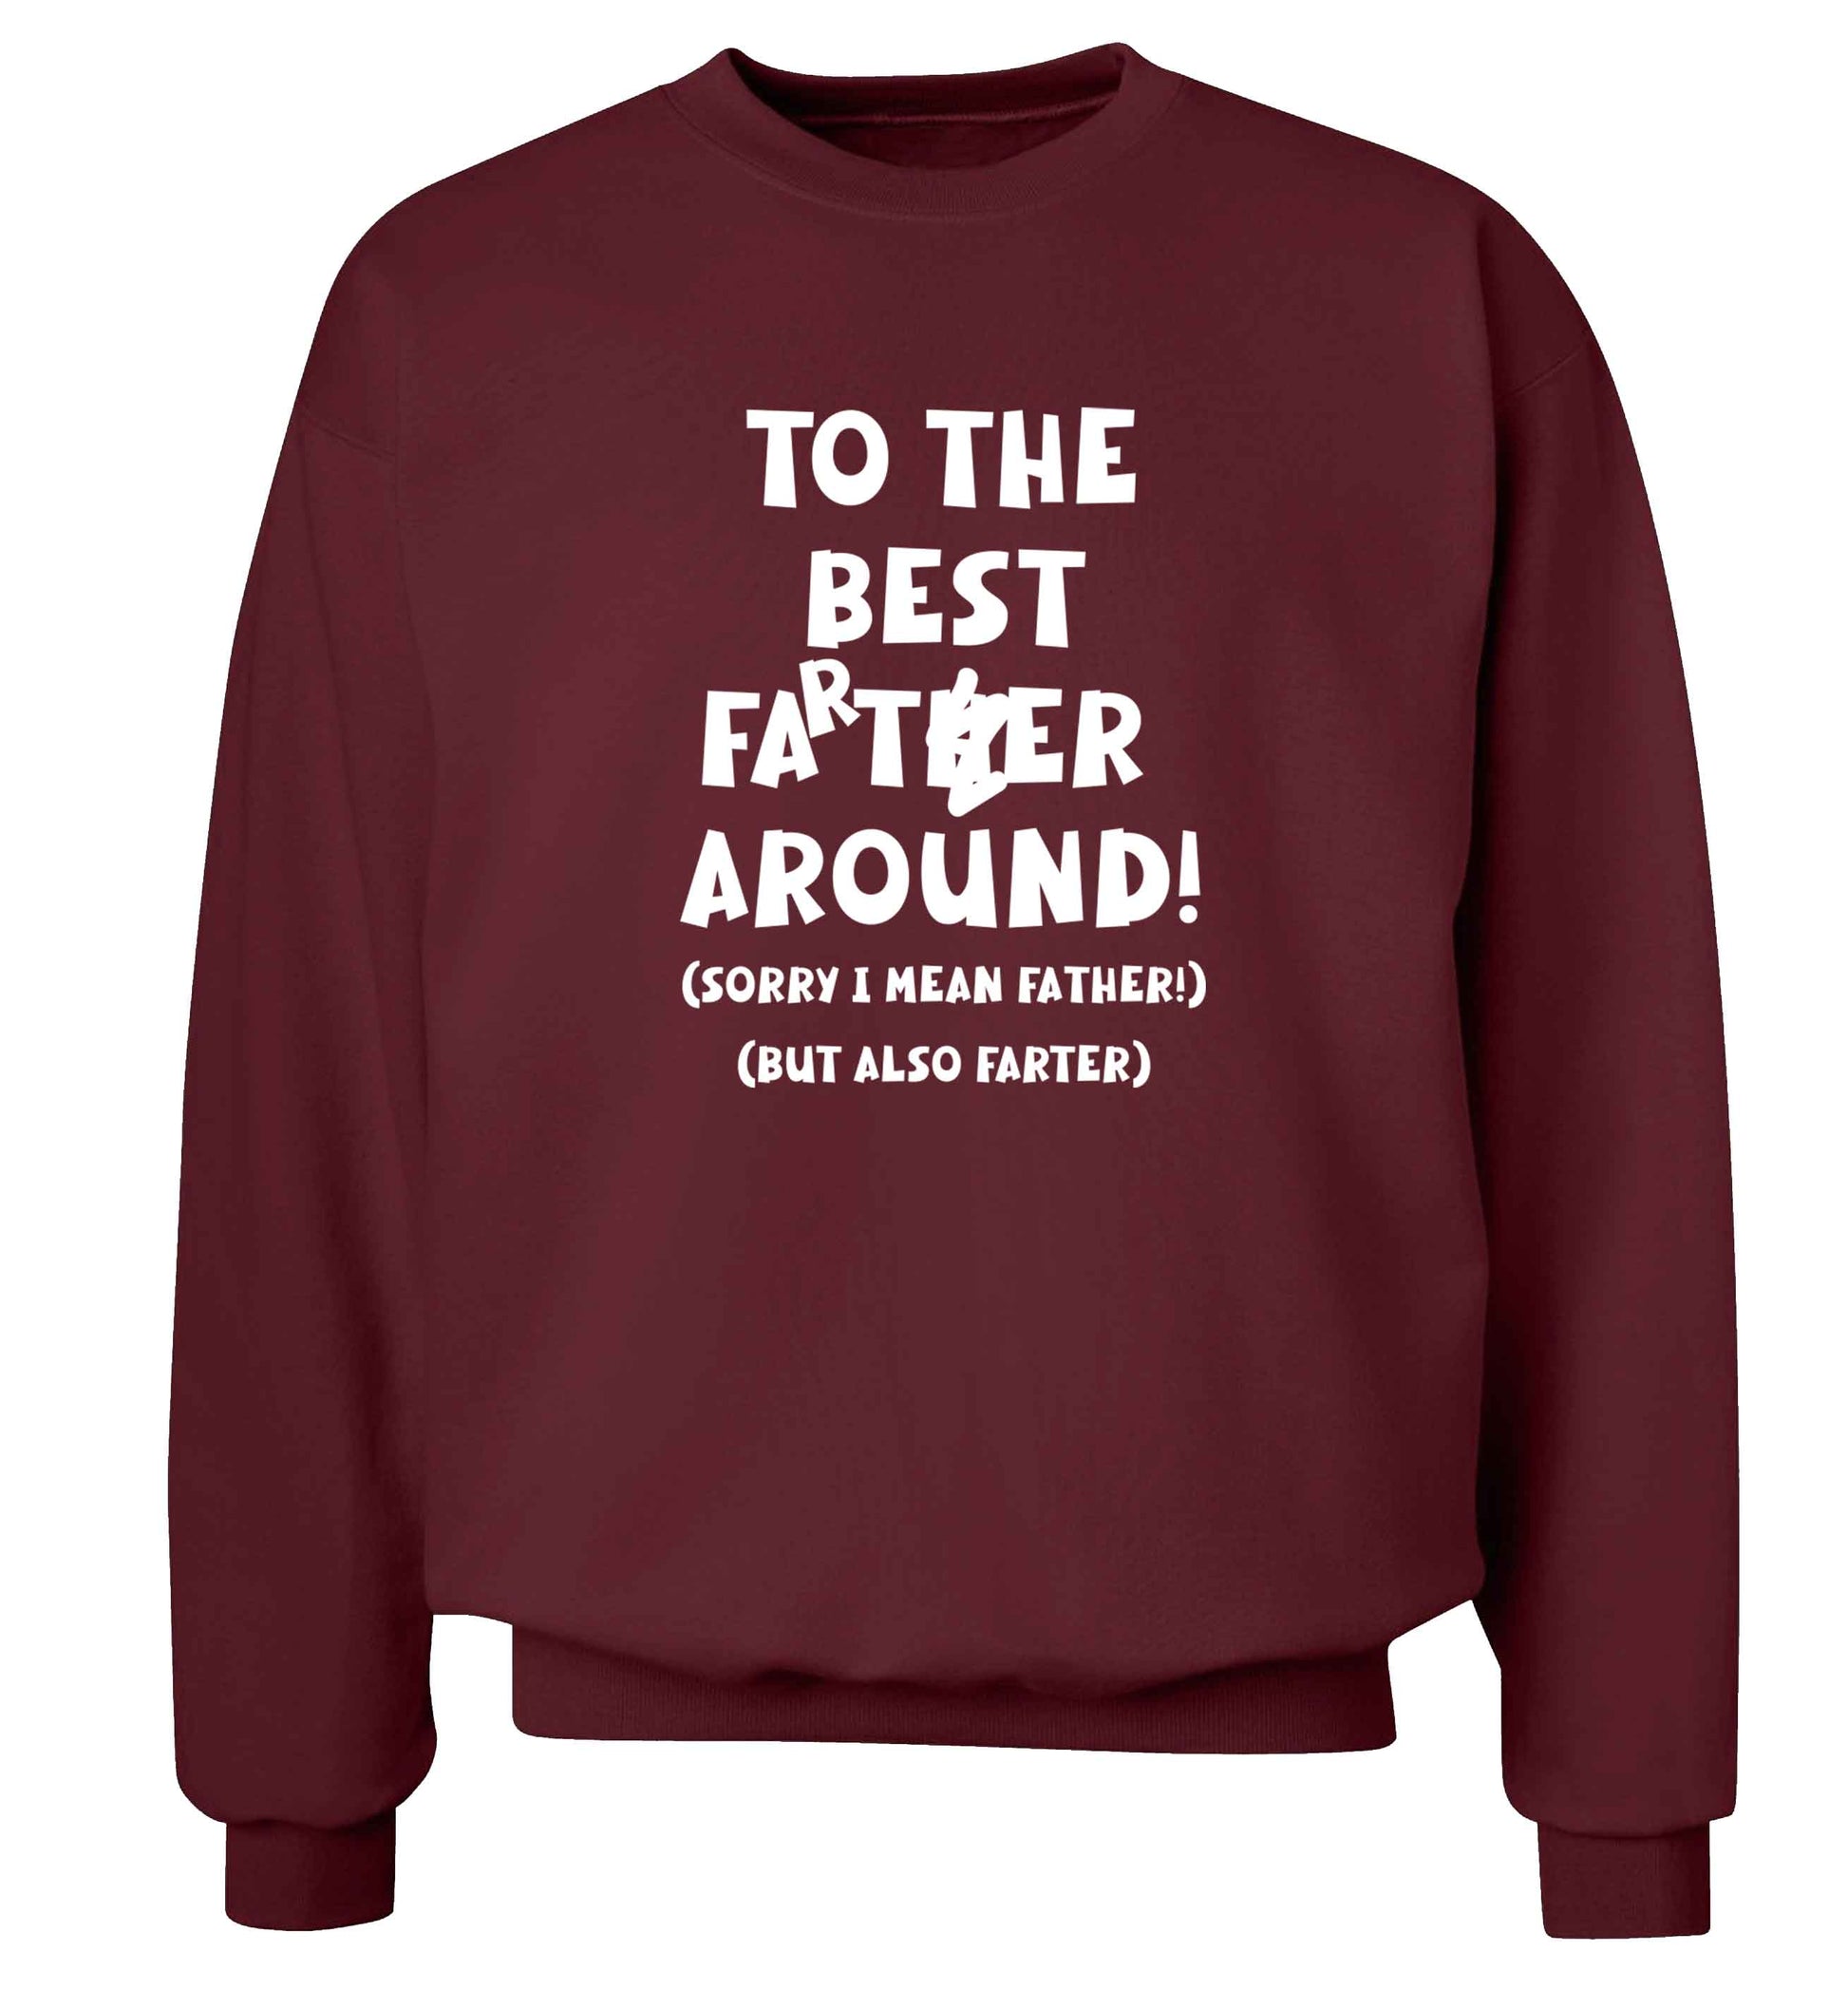 To the best farter around! Sorry I mean father, but also farter adult's unisex maroon sweater 2XL